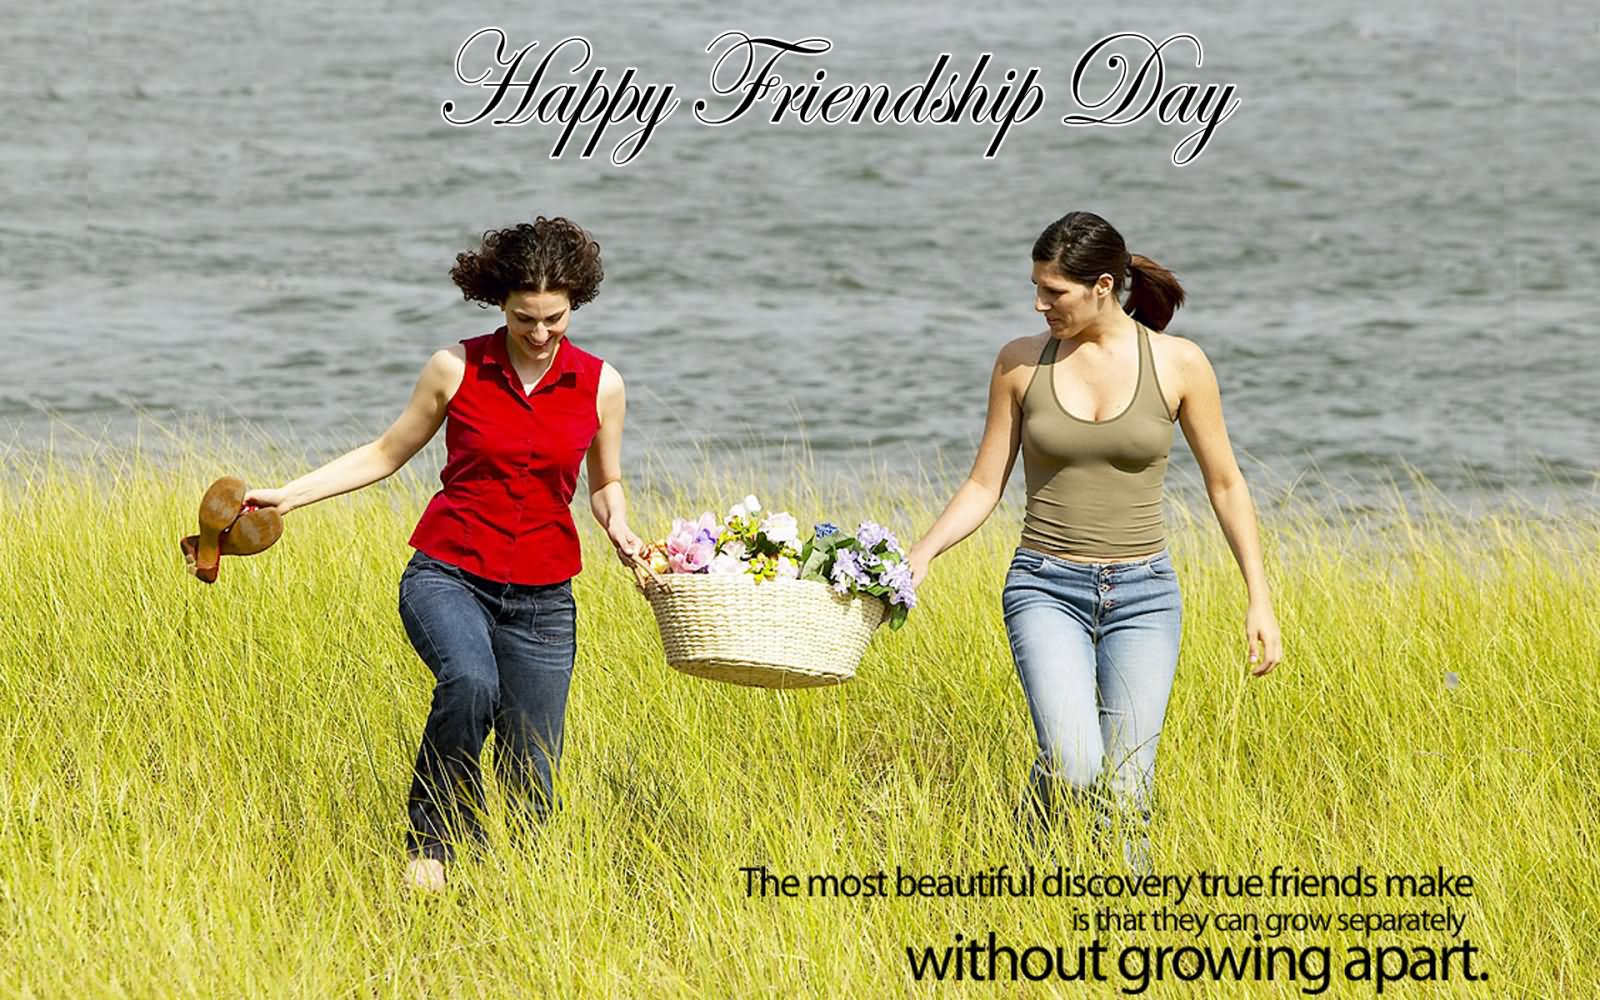 Happy Friendship Day The Most Beautiful Discovery True Friends Make Is That They Can Grow Separately Without Growing Apart